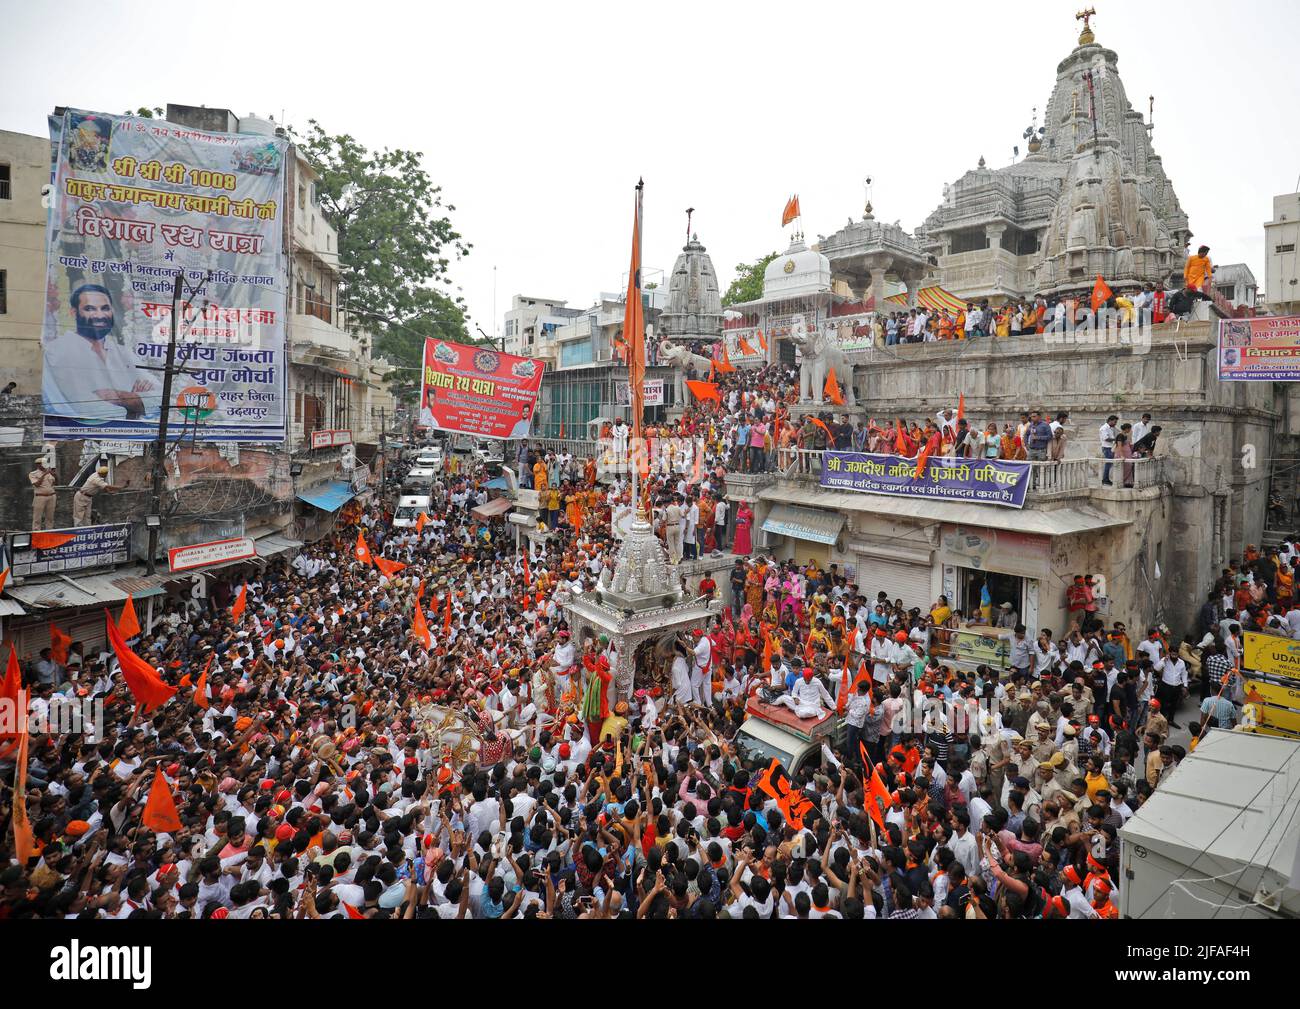 Hindu devotees gather to pull the 'Rath', or the chariot of Lord Jagannath, during the annual Rath Yatra, or chariot procession, in Udaipur in the northwestern state of Rajasthan, India, July 1, 2022. REUTERS/Amit Dave Stock Photo